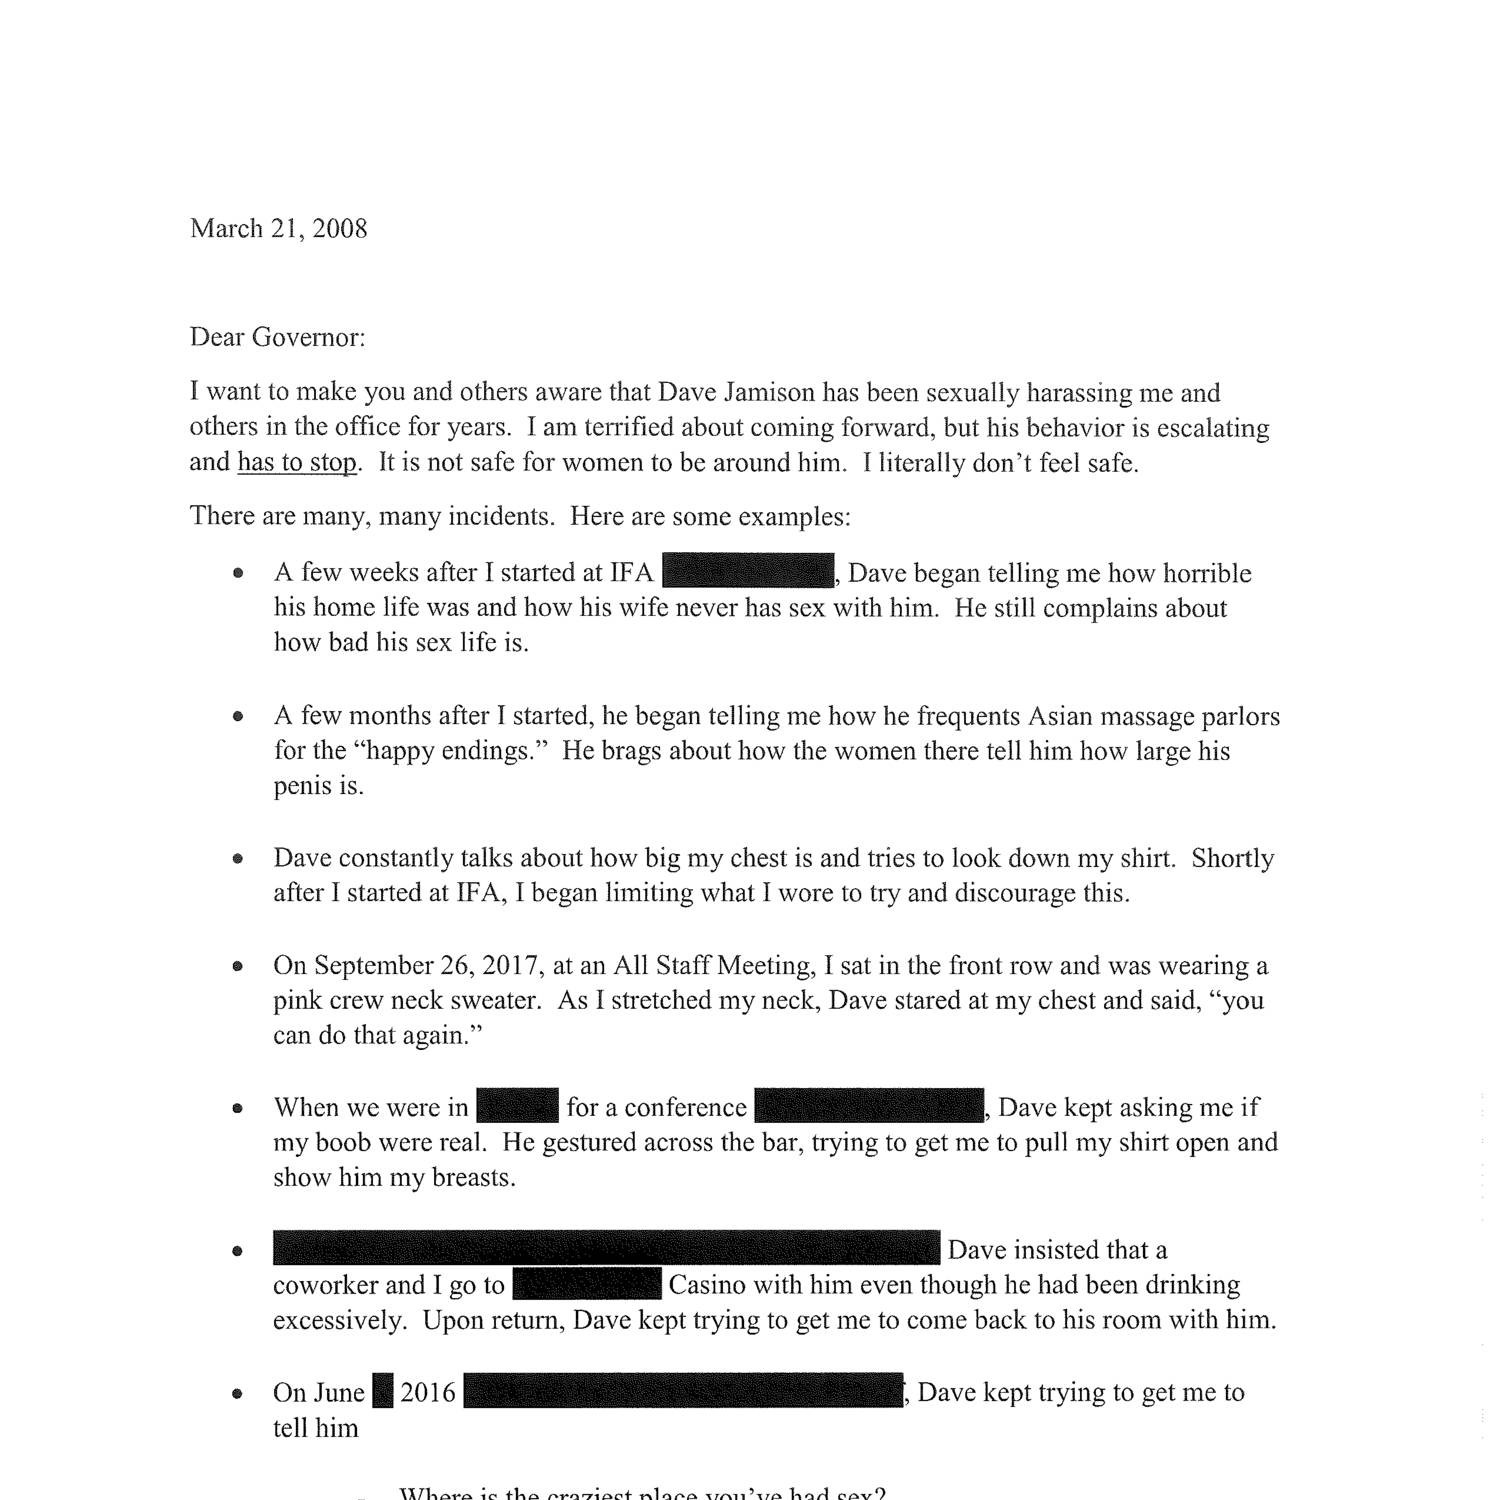 hack a redacted pdf document